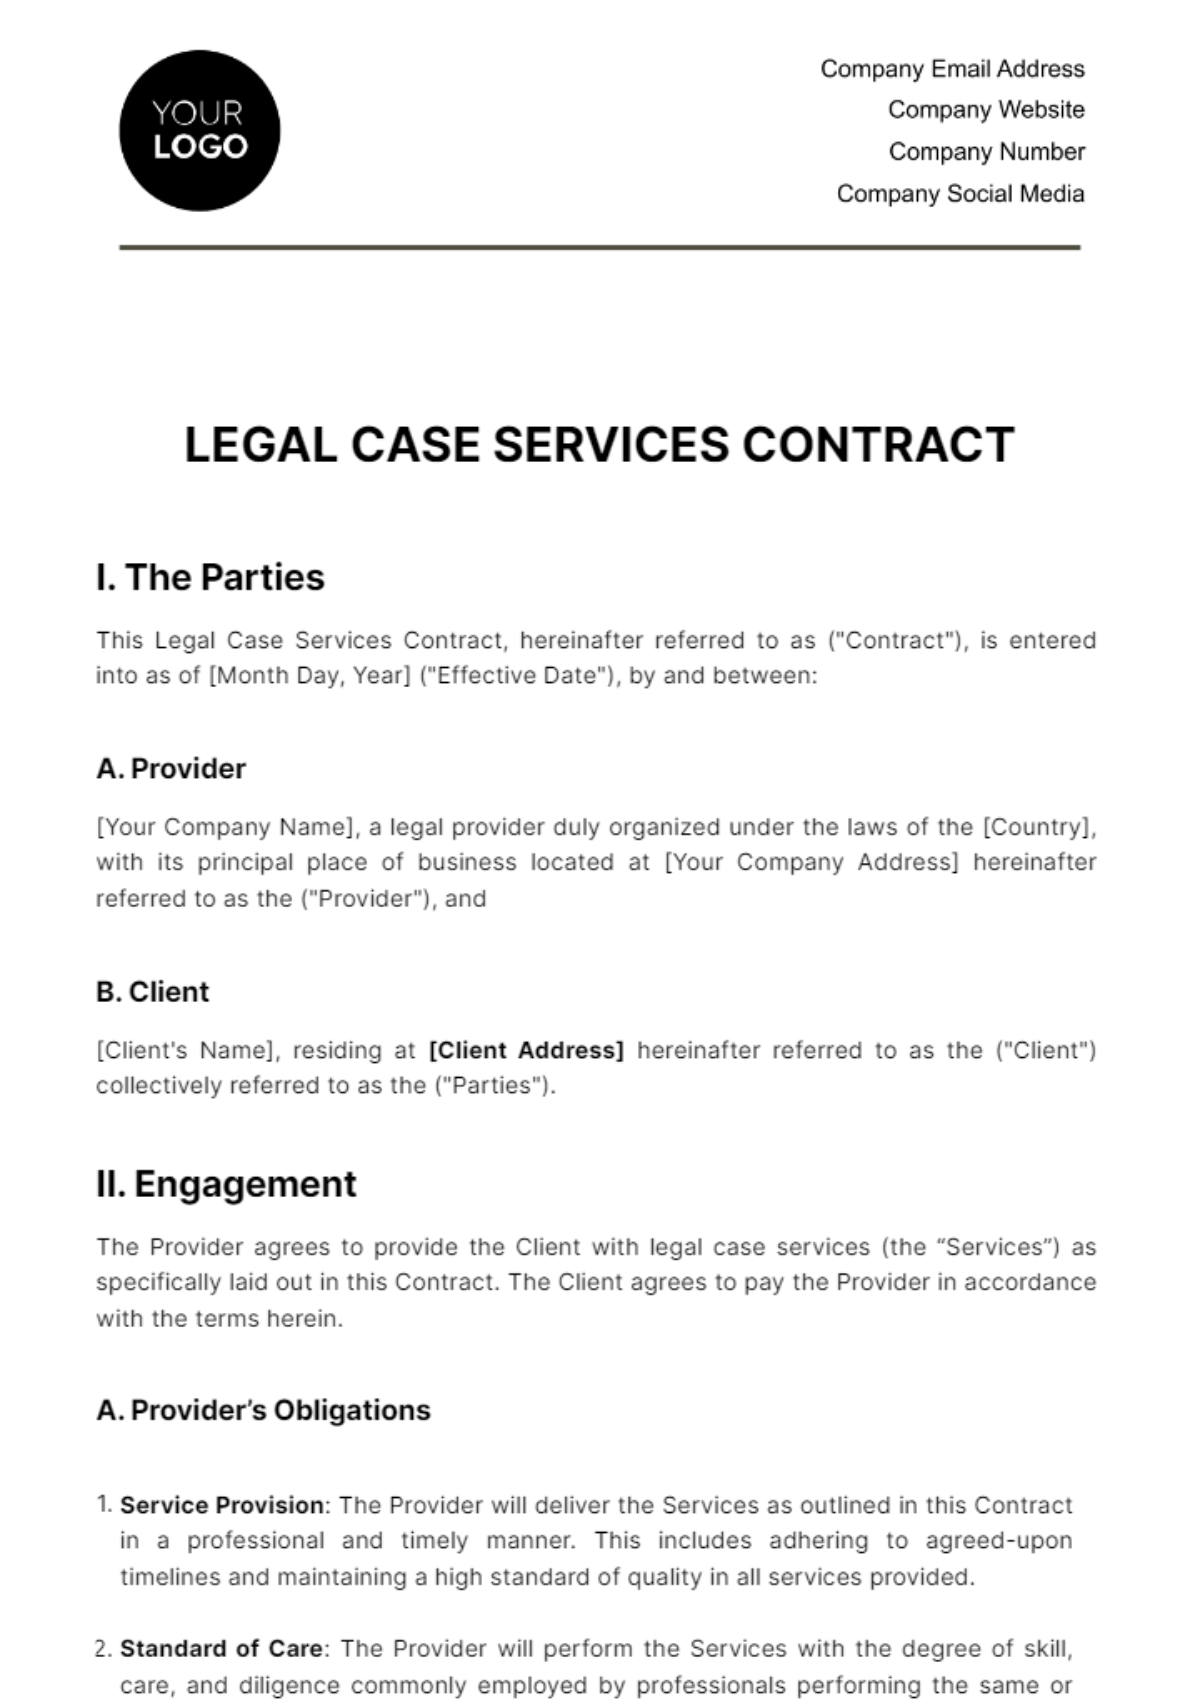 Free Legal Case Services Contract Template